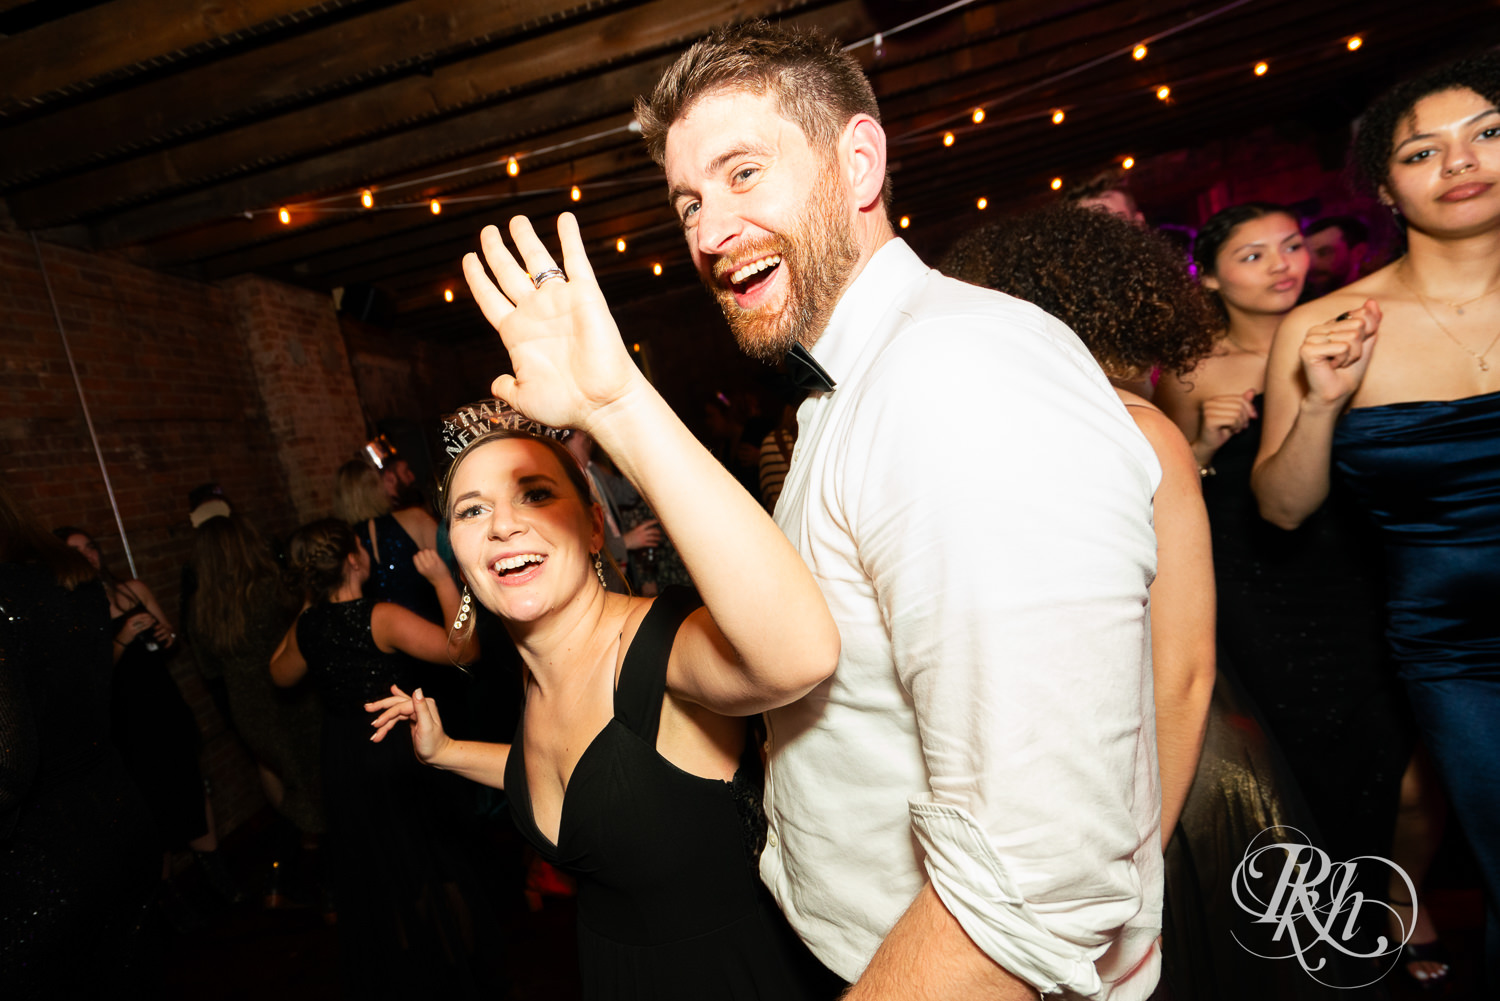 Guests dance during wedding reception at Gatherings at Station 10 in Saint Paul, Minnesota.